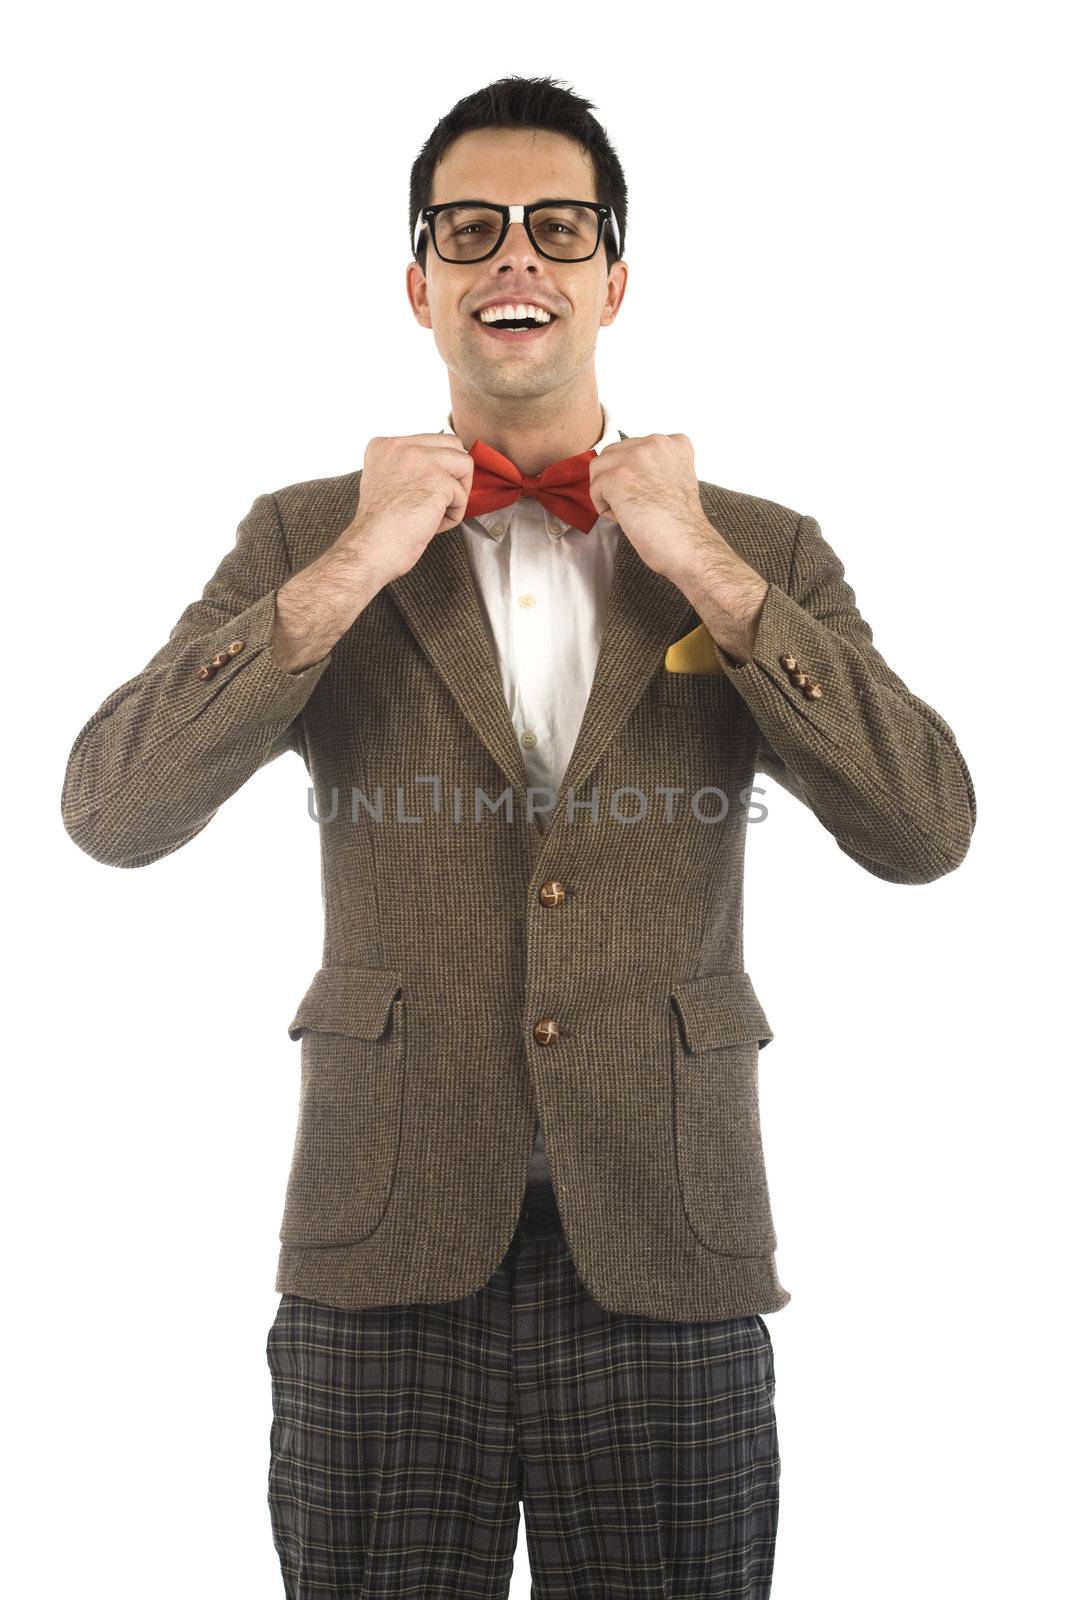 A young, caucasian nerd ajusting his bow-tie, isolated on a white background.